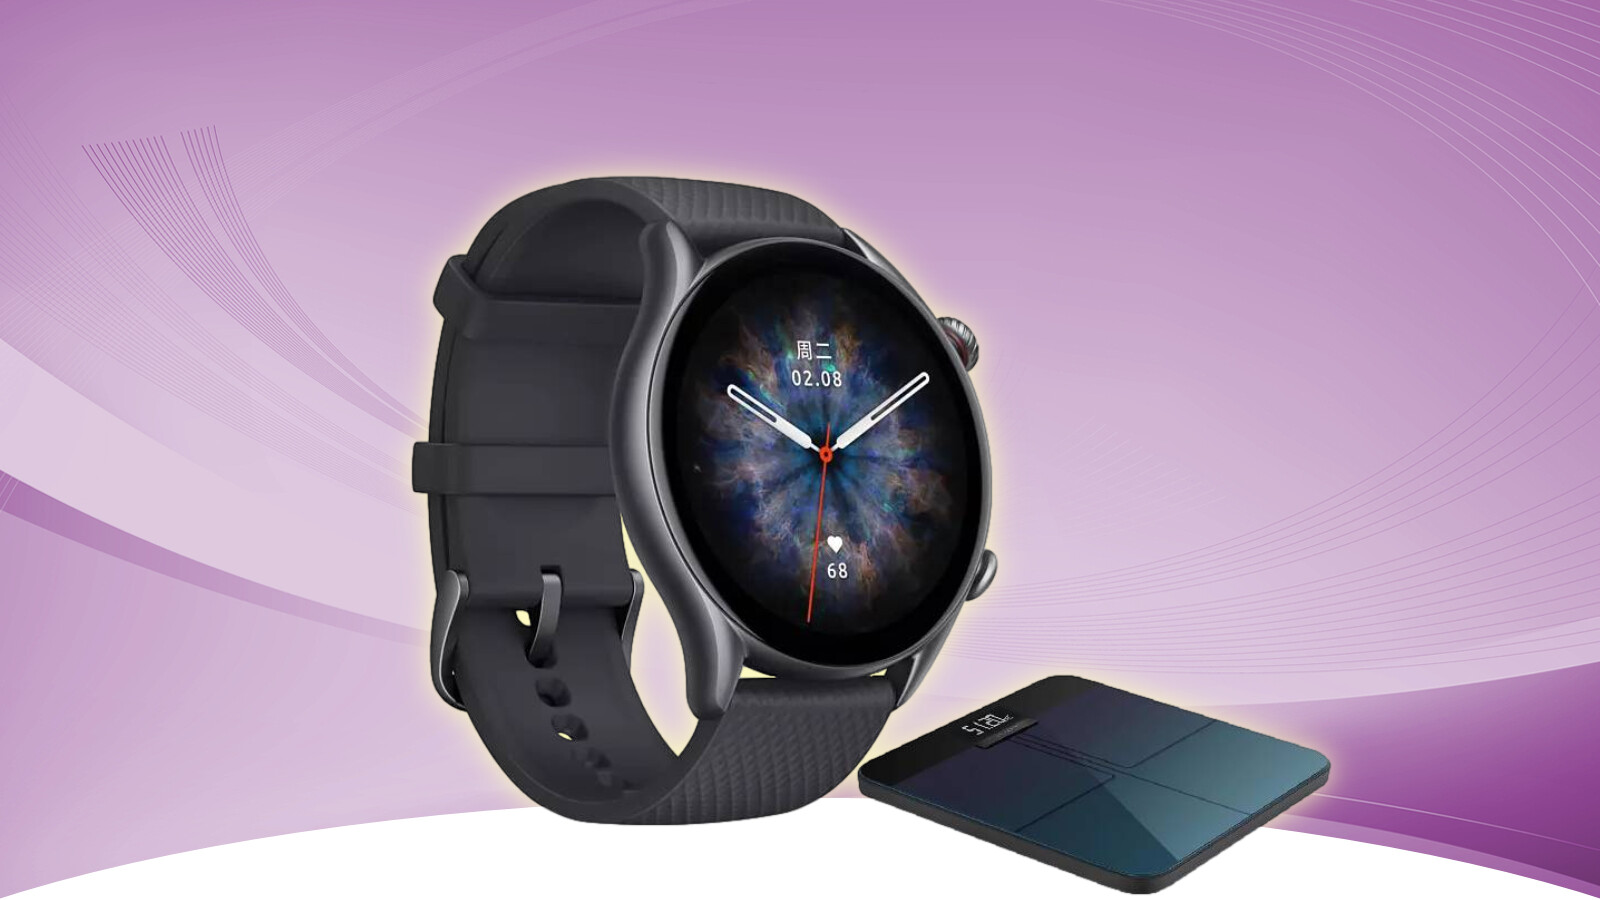 3: Smartwatch at Media Markt with a gift on offer - iGamesNews